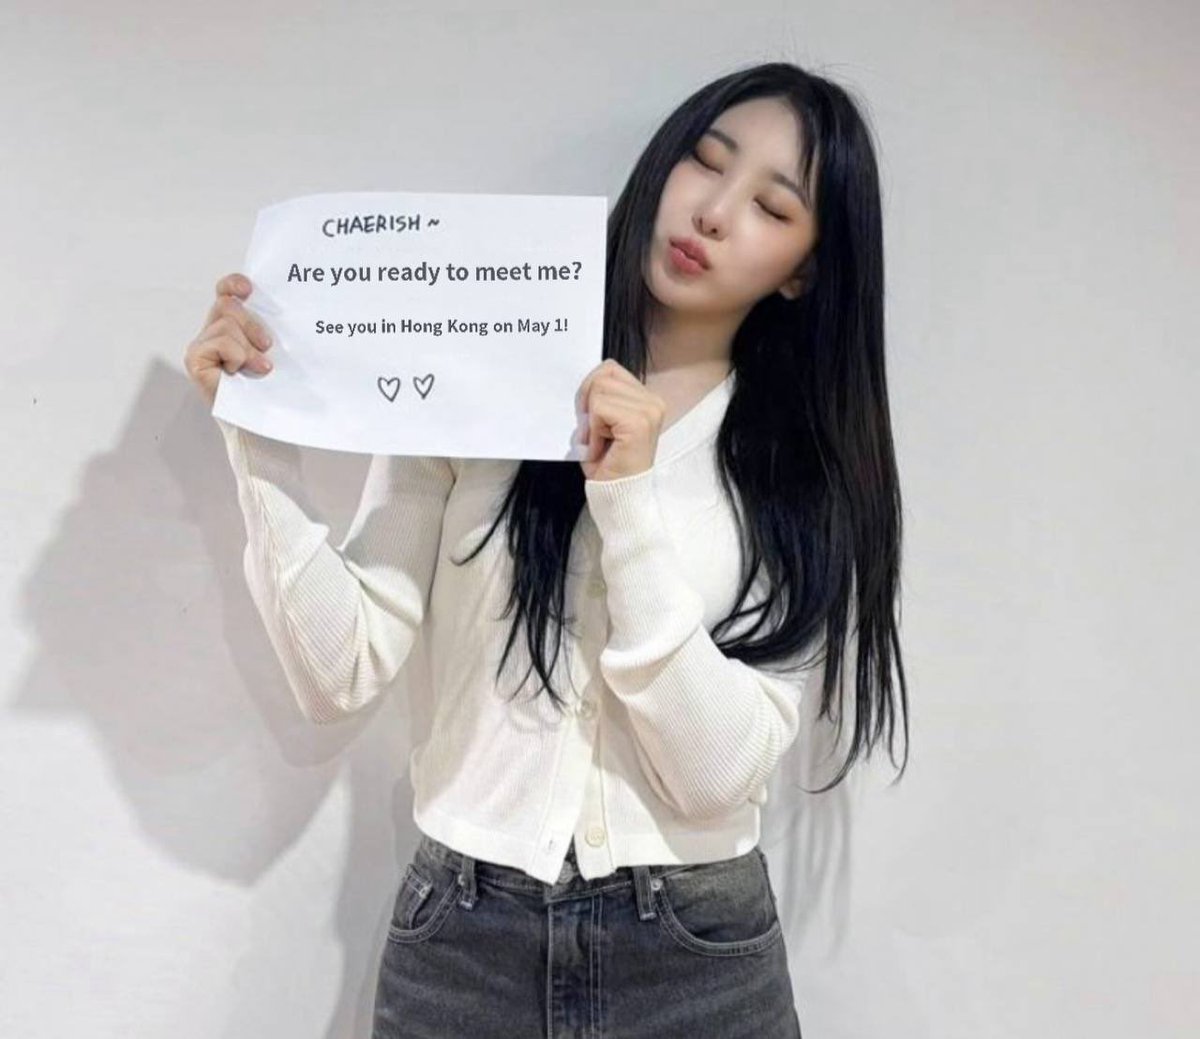 Chaeyeon wrote in traditional Chinese?